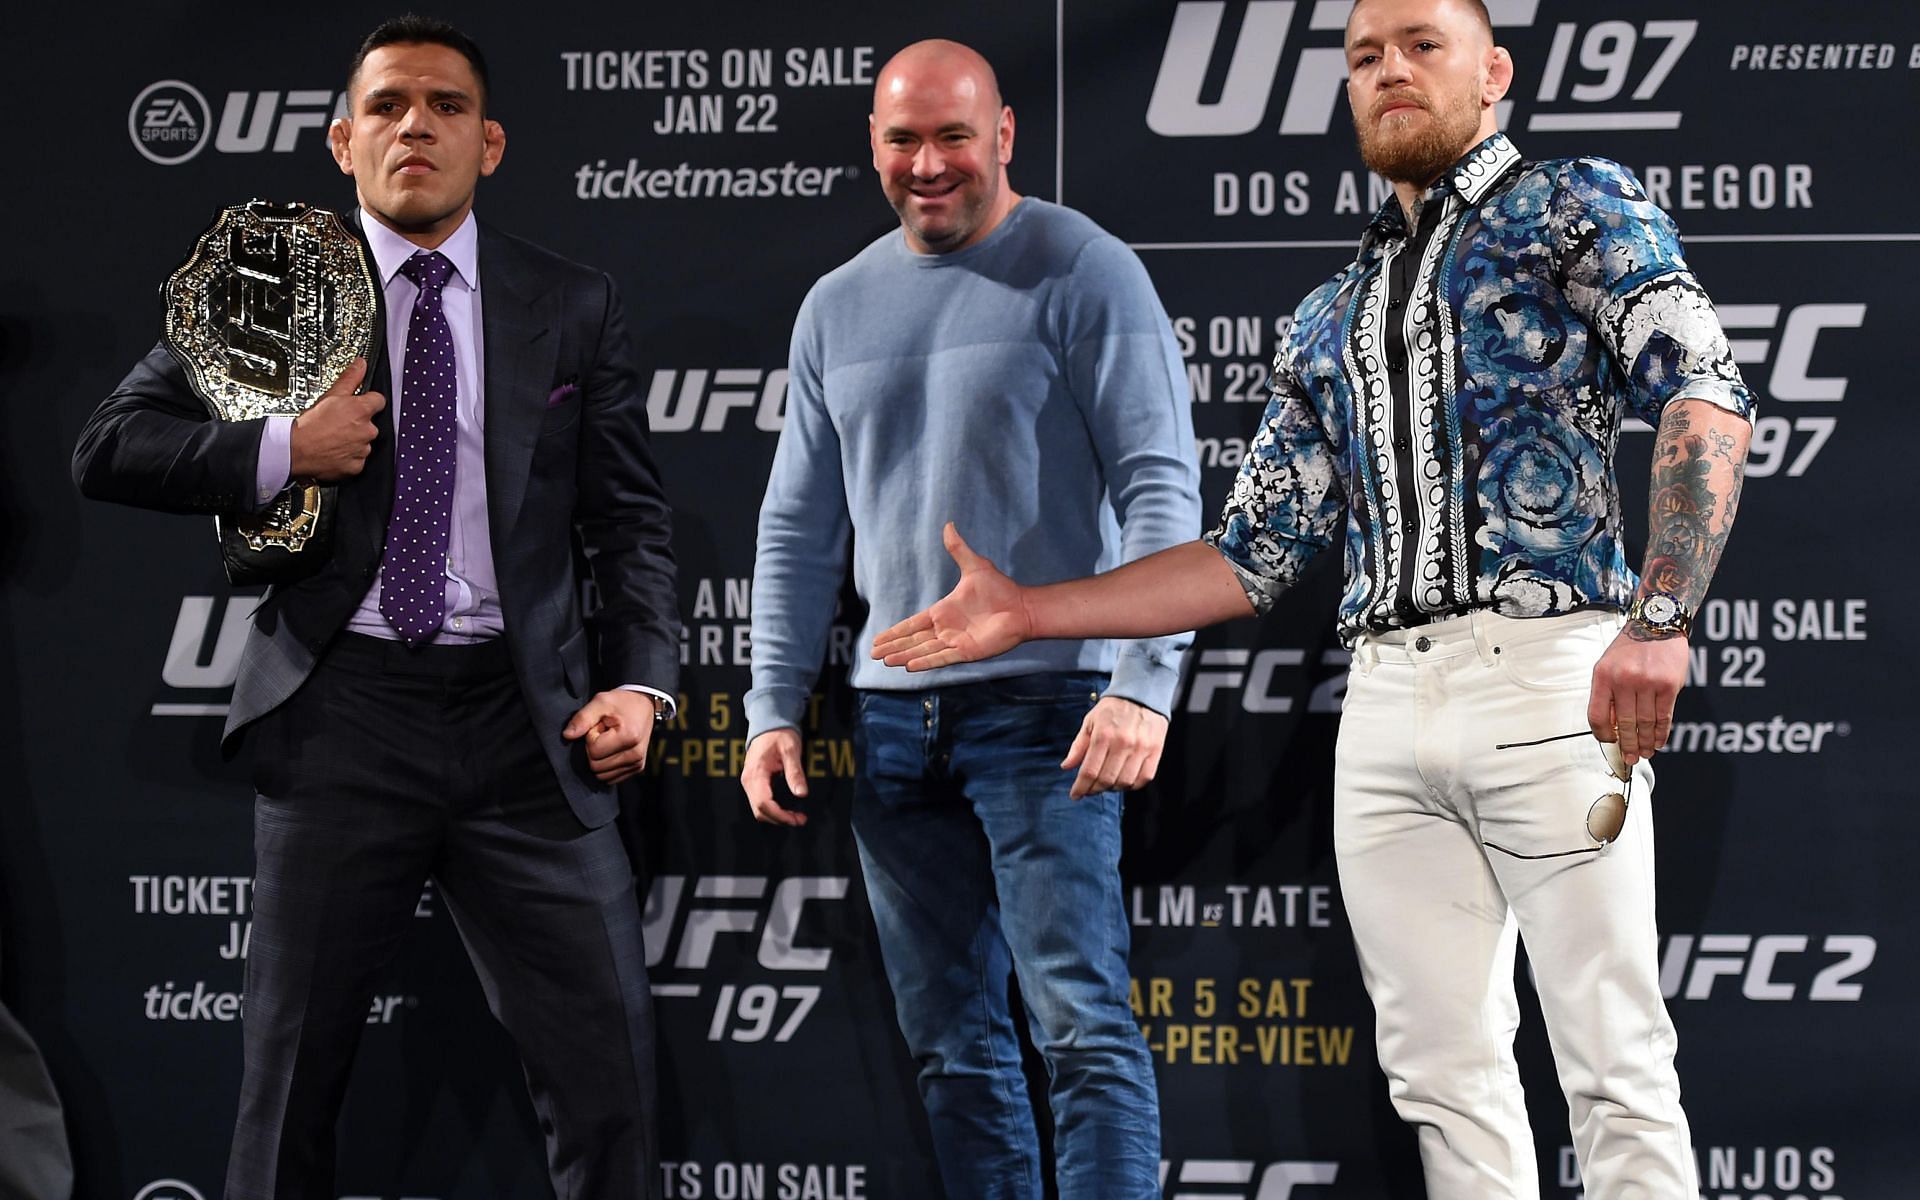 Would UFC history have been changed had Rafael dos Anjos and not Nate Diaz fought Conor McGregor at UFC 196?